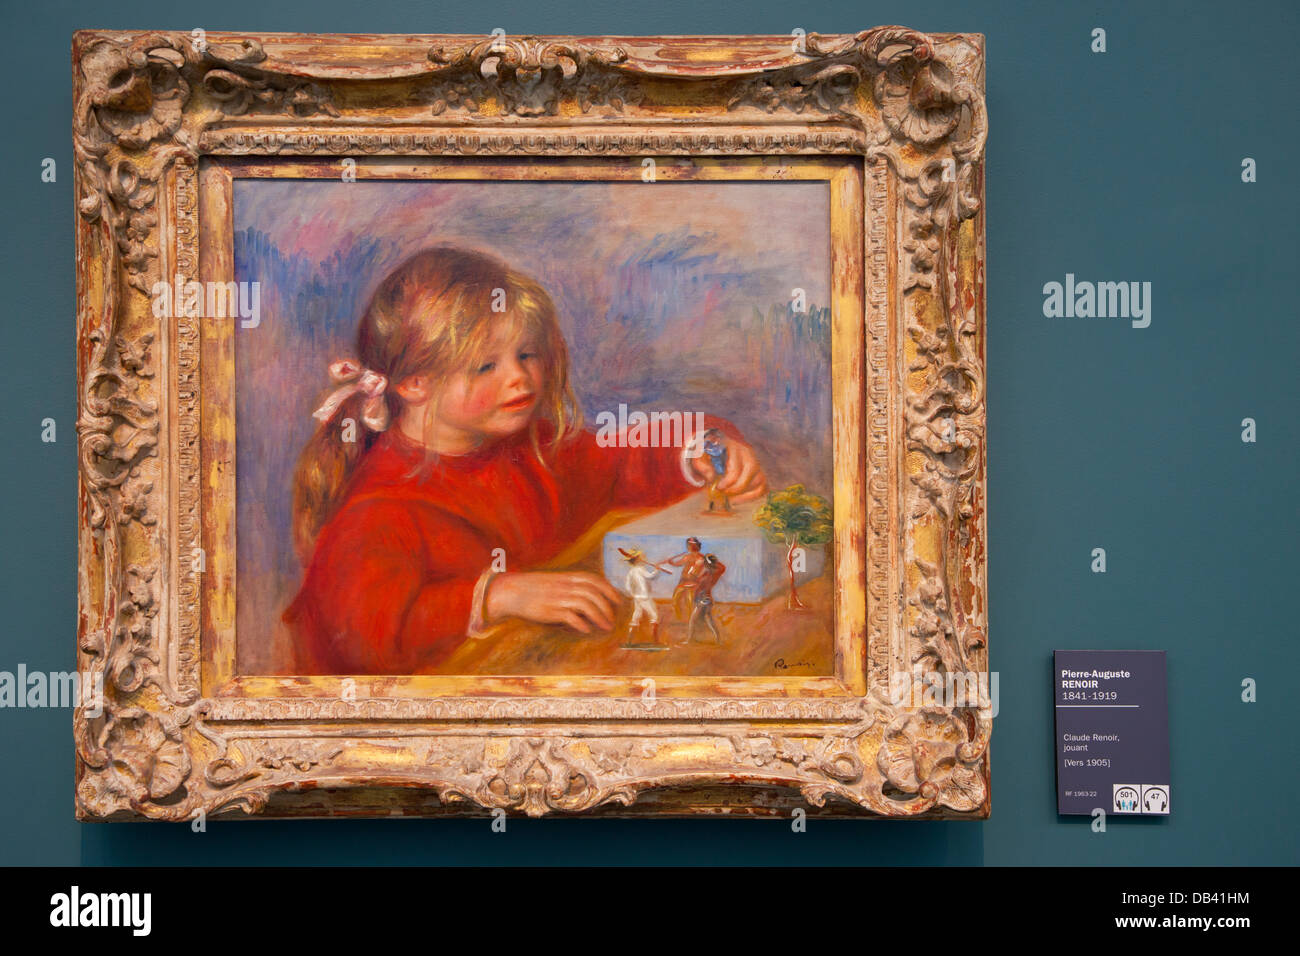 Renoir's painting of his young son (Claude Renoir, jouant 1905) on display at Musee l'Orangerie, Paris France Stock Photo